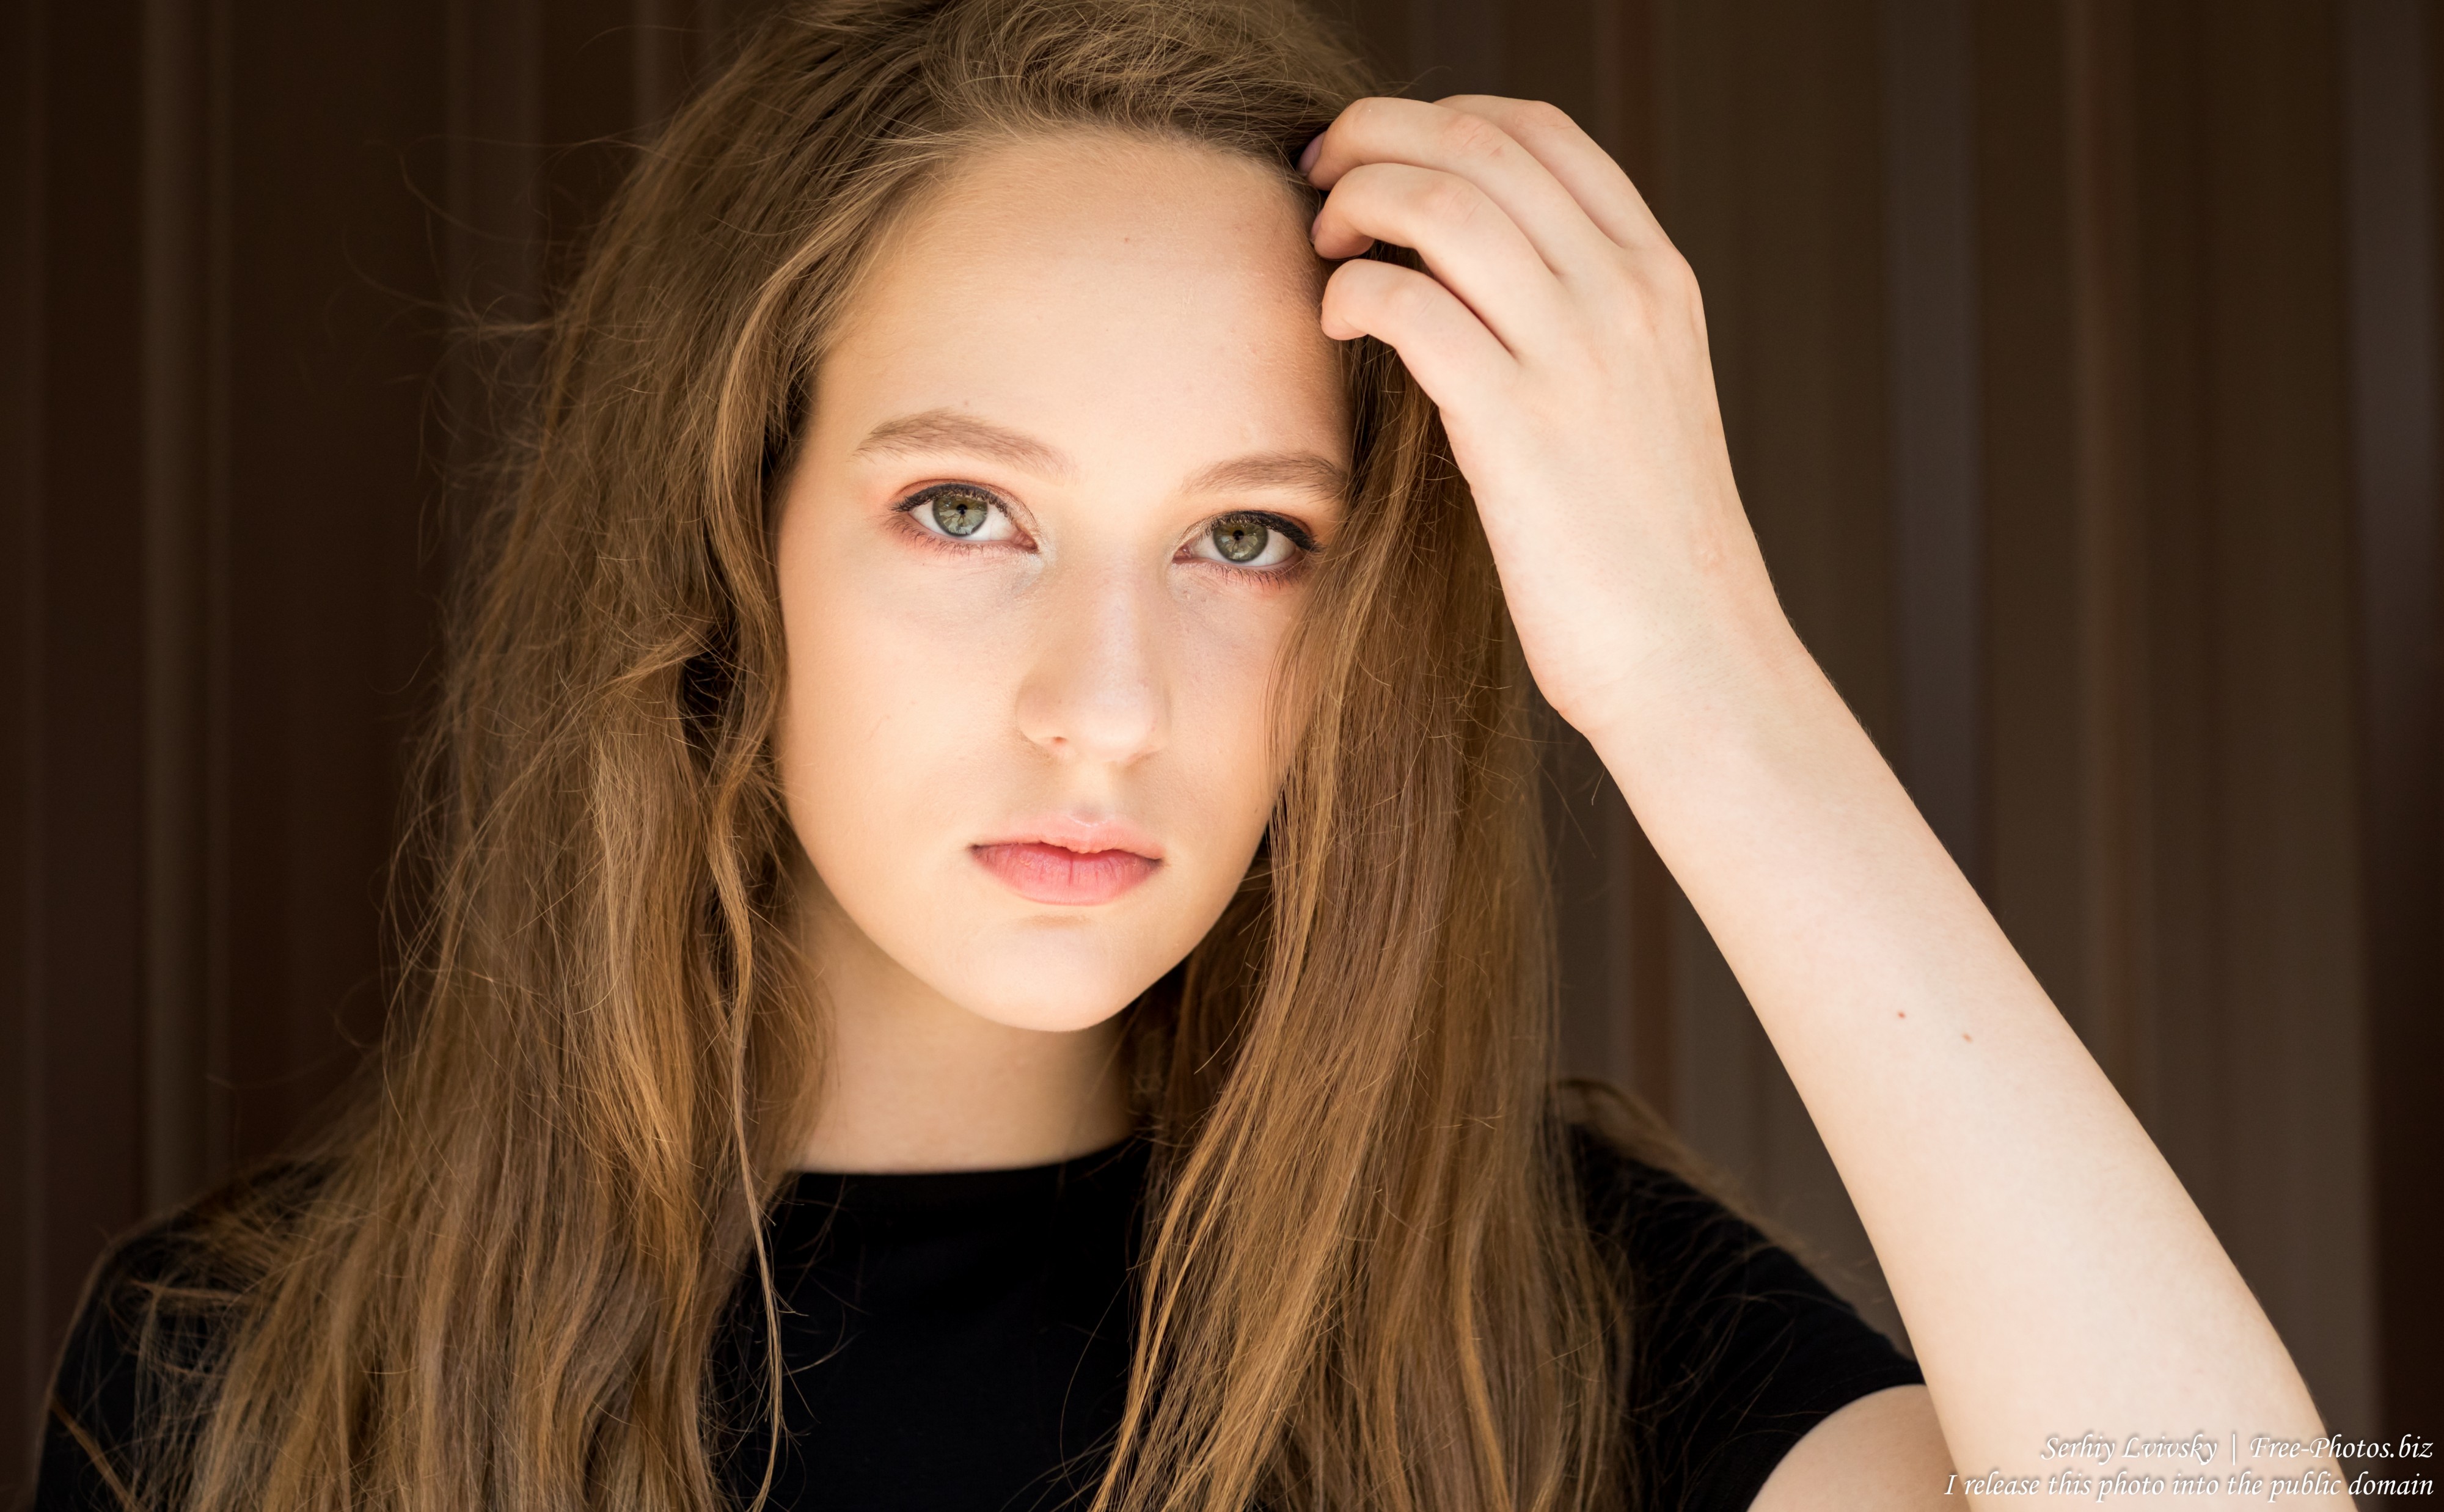 Photo Of Nastia A 16 Year Old Girl With Natural Fair Hair Photographed In June 2019 By Serhiy